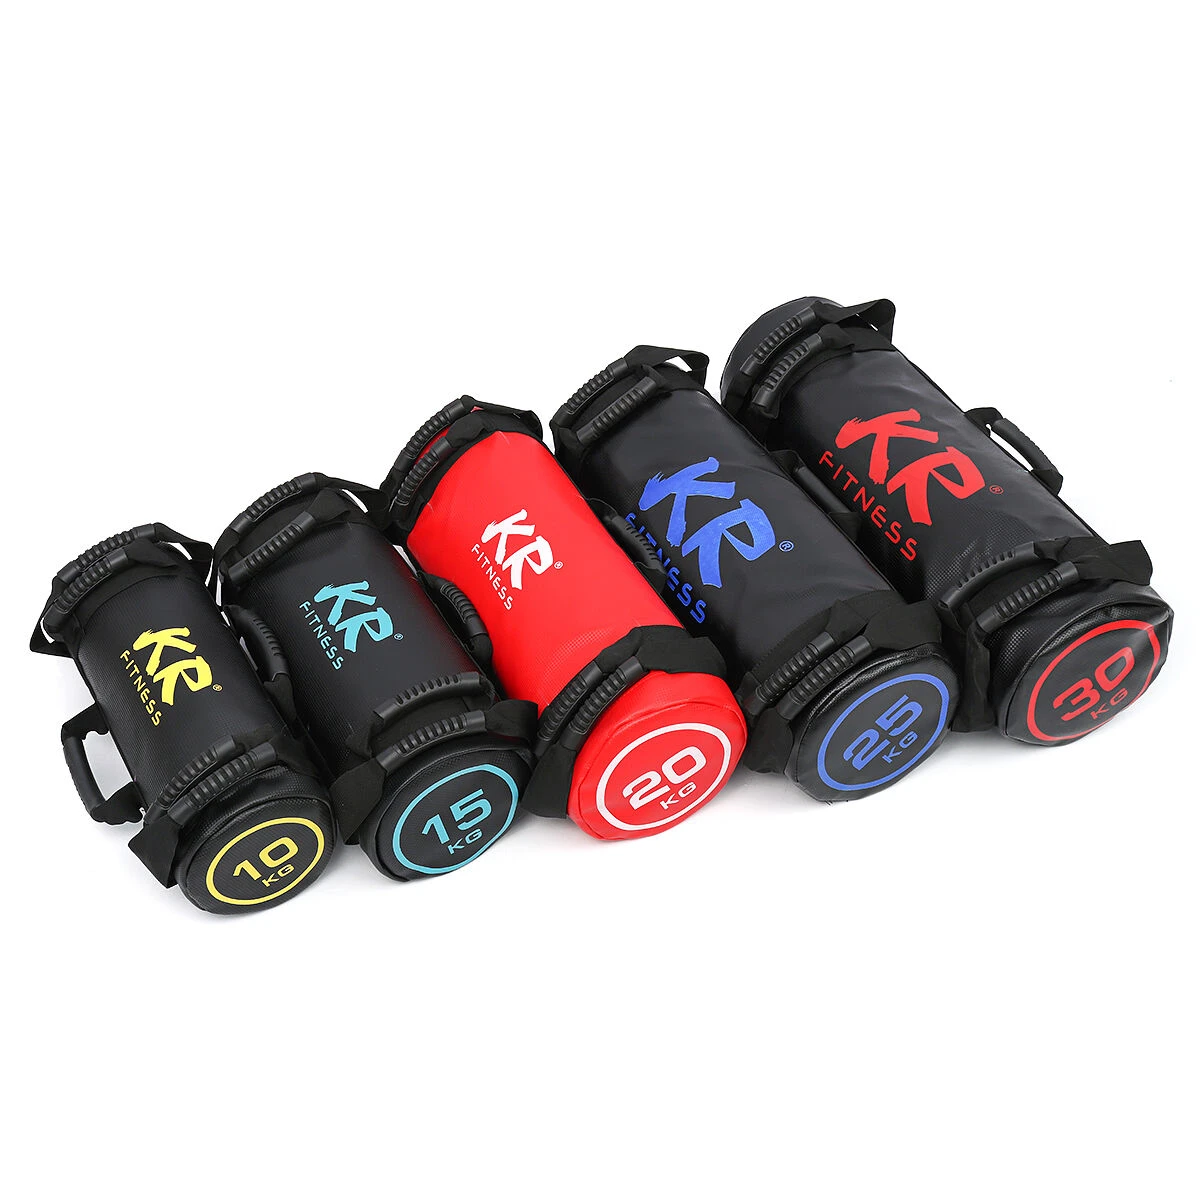 5 10 15 20 25 30KG Training Fitness Power Exercise Boxing Weights Gym Sand Bag Target